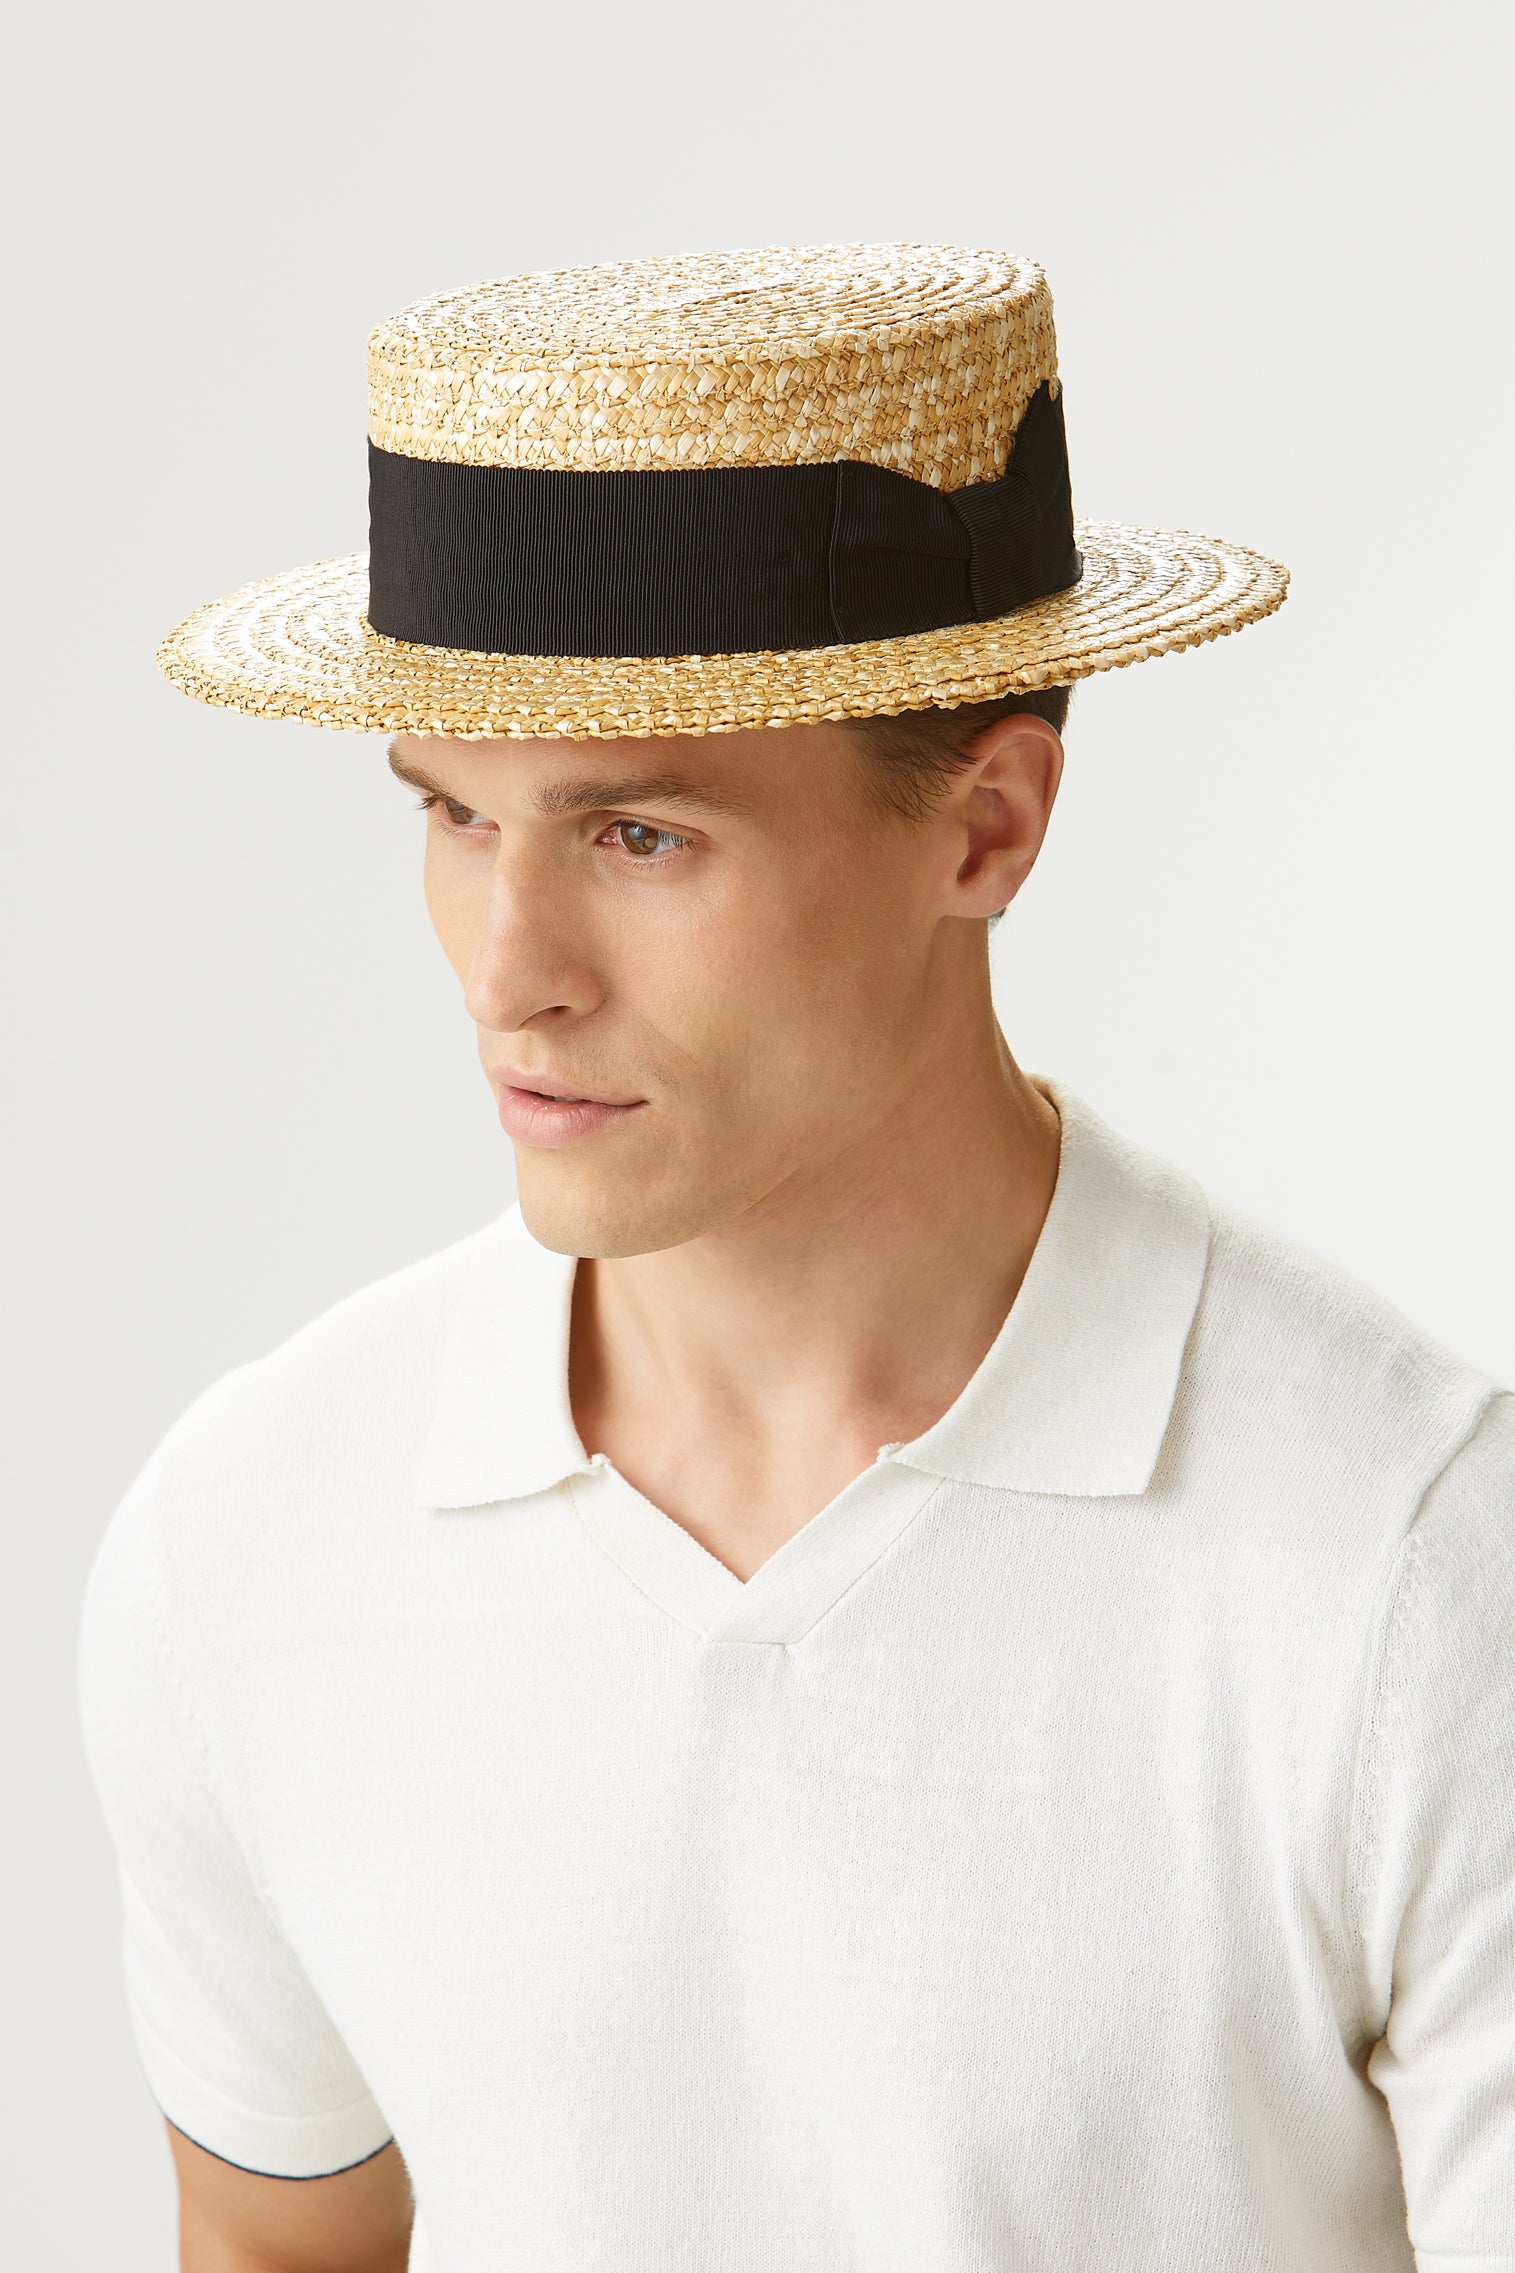 Classic Boater - Panamas and Sun Hats for Men - Lock & Co. Hatters London UK